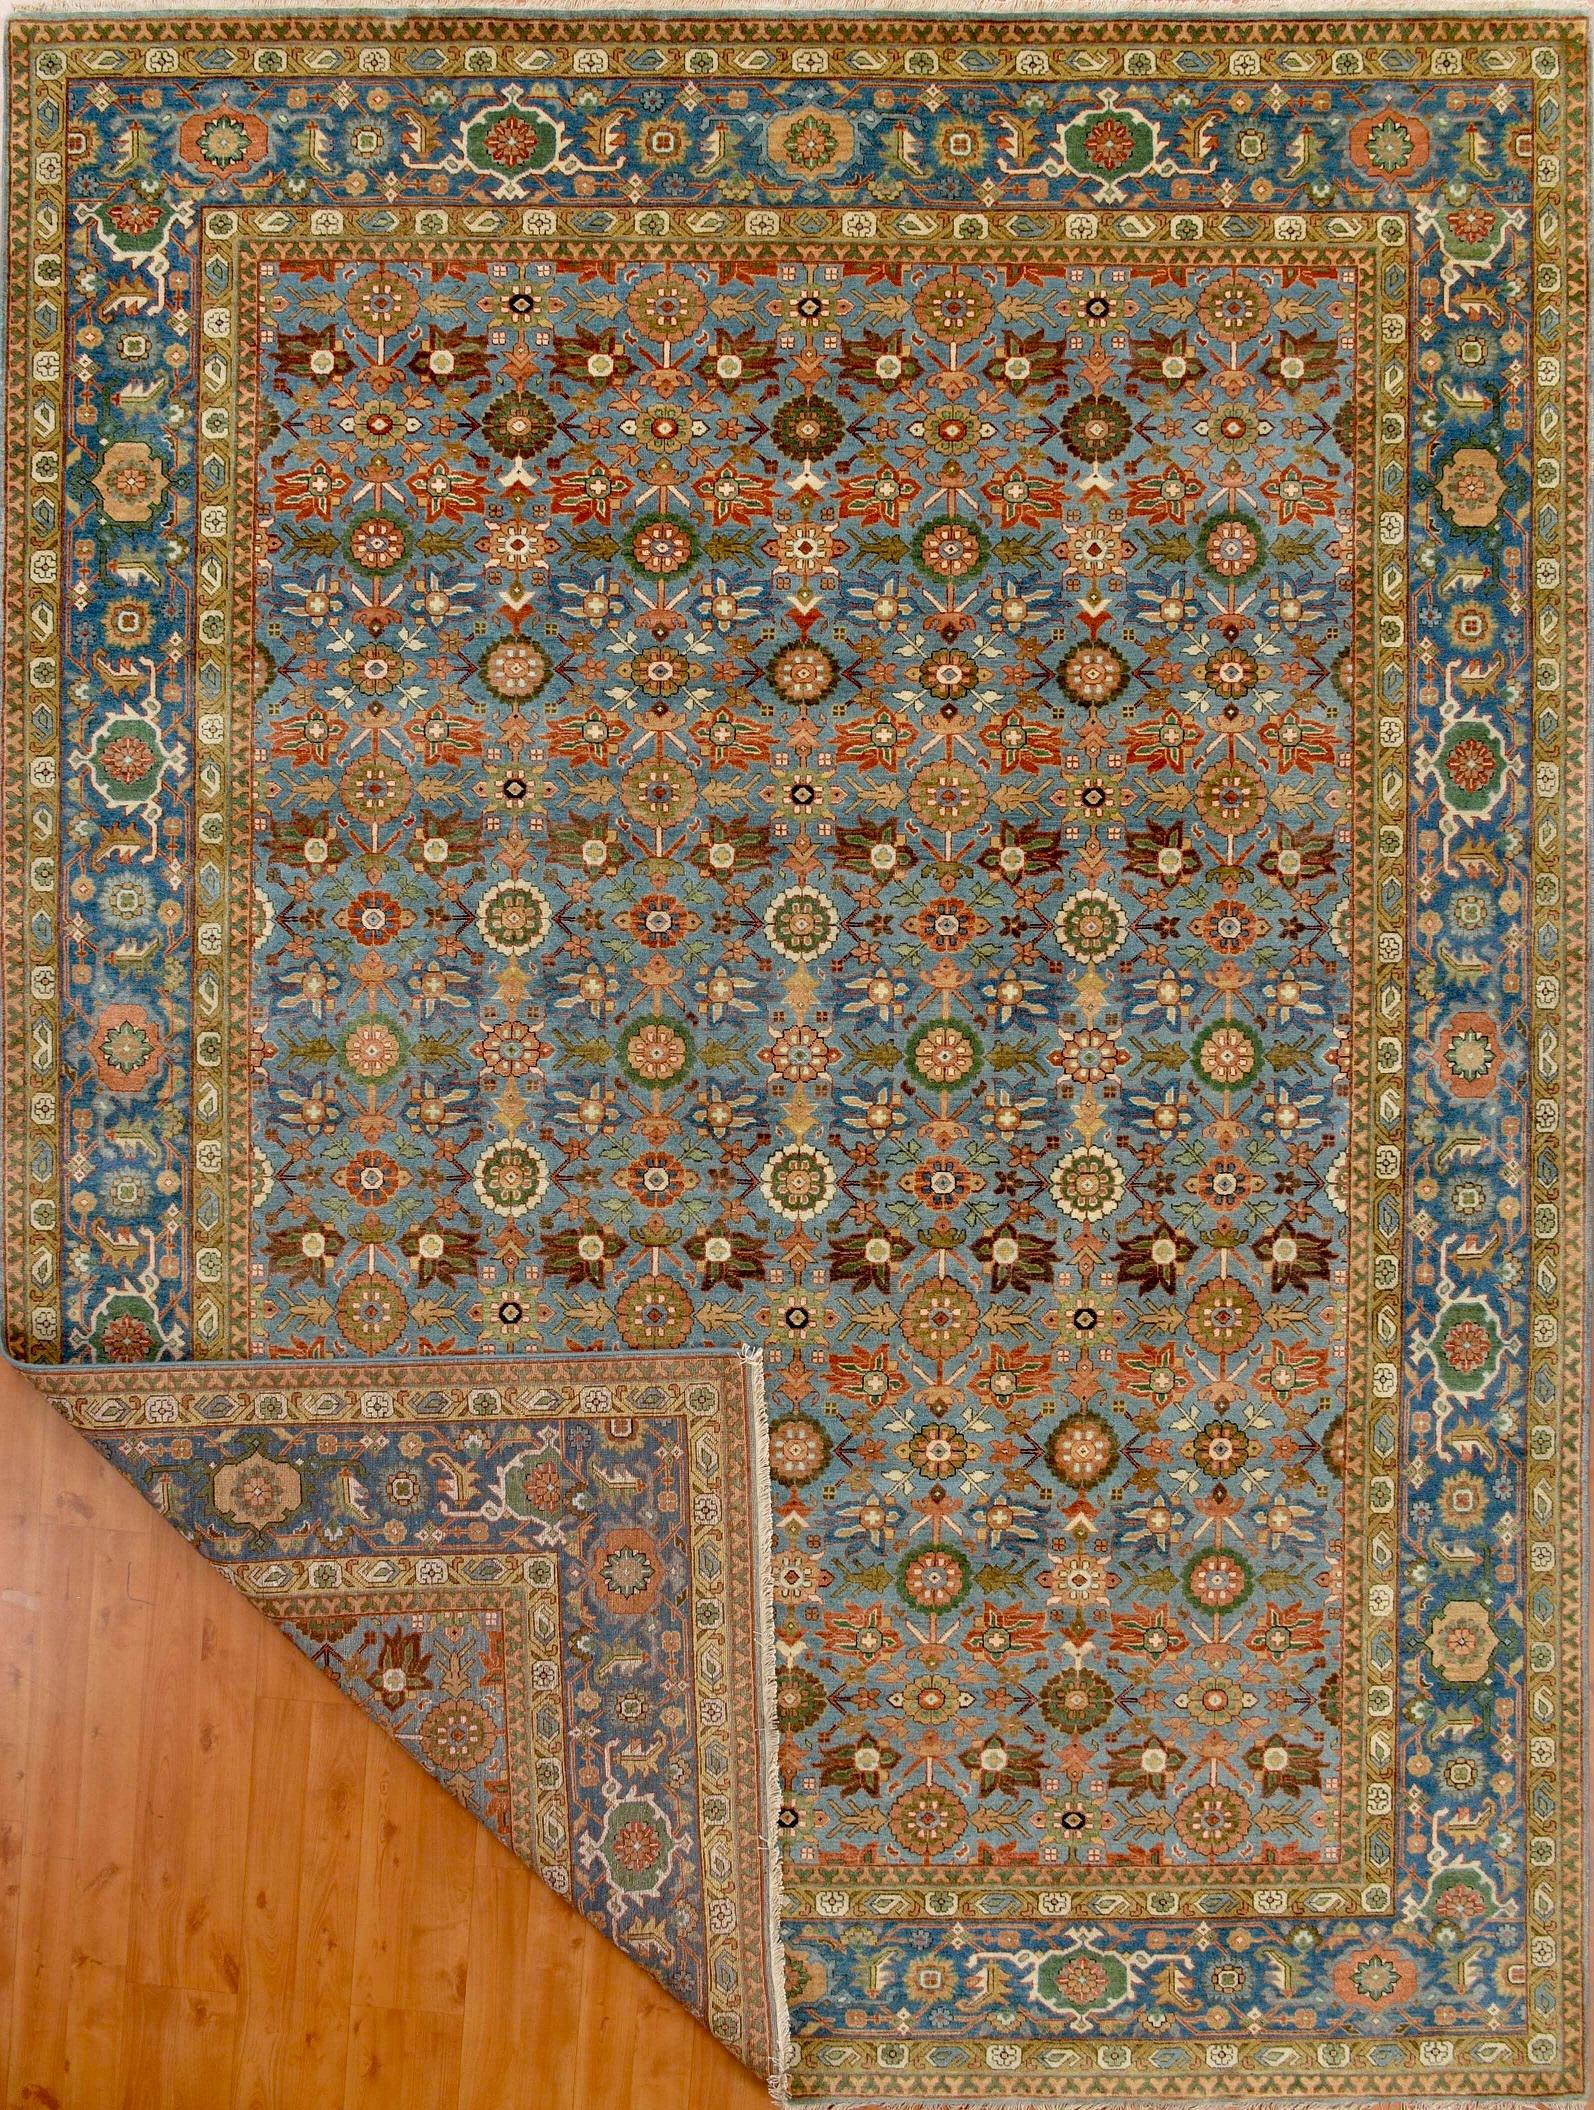 Hand-knotted using Persian technique.

Our production- this rug measures 8' 1